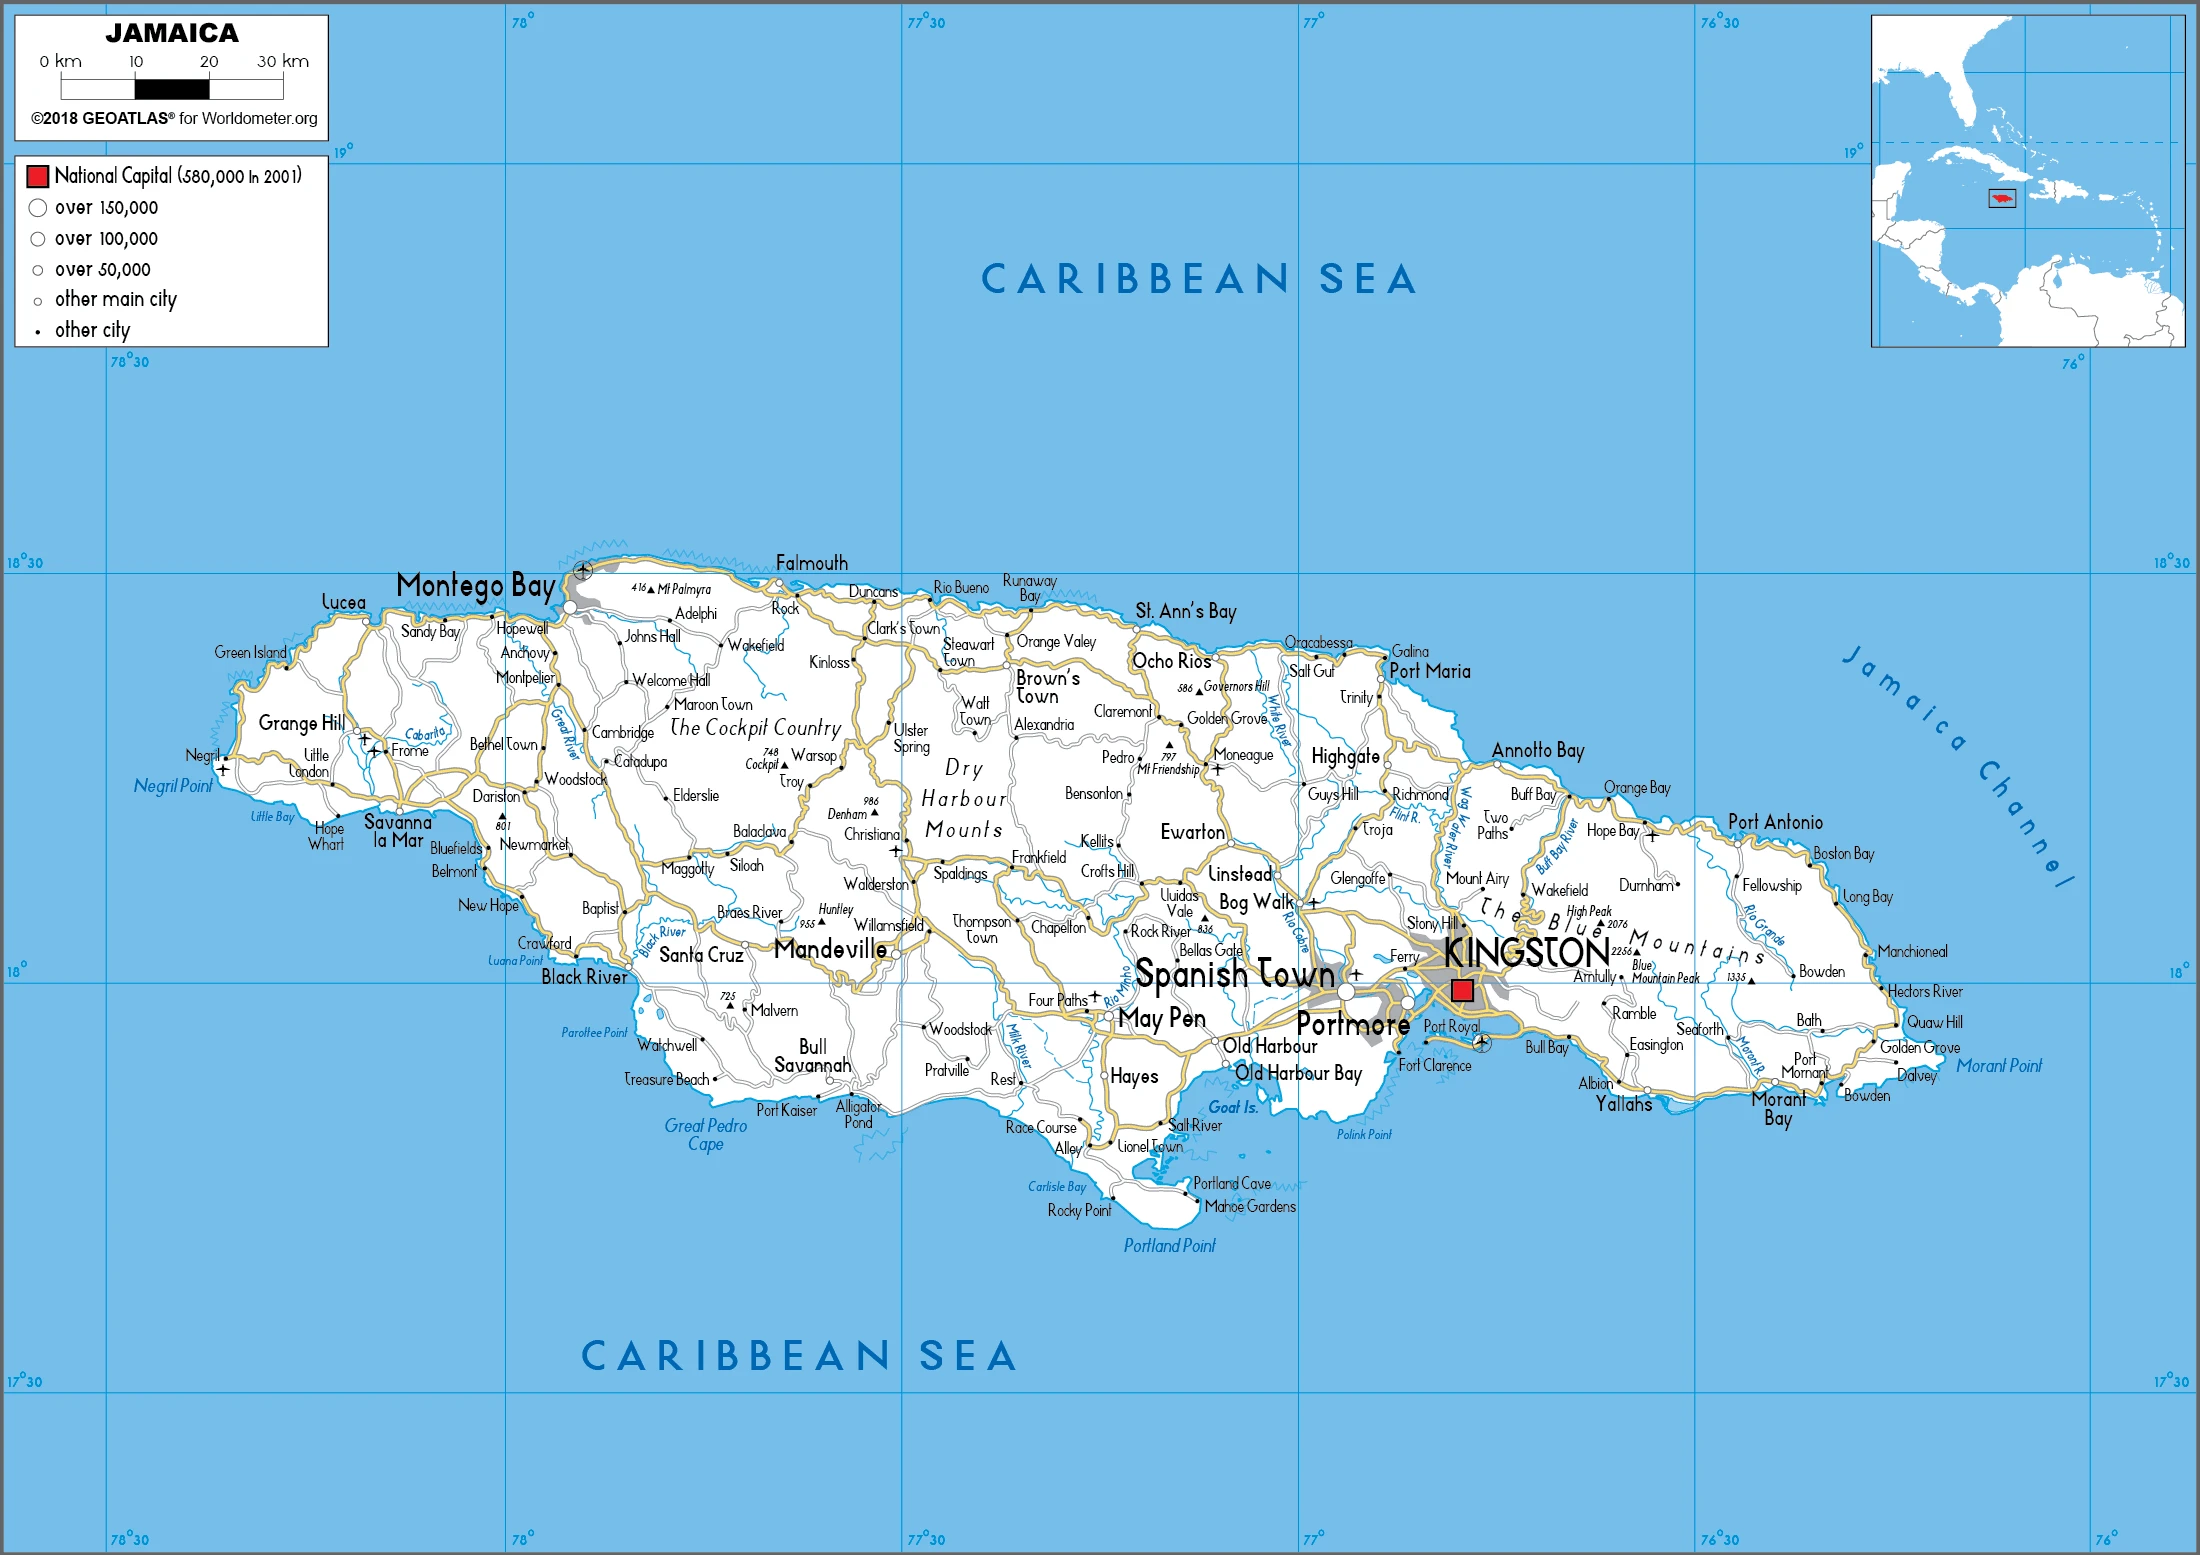 The route plan of the Jamaican roadways.